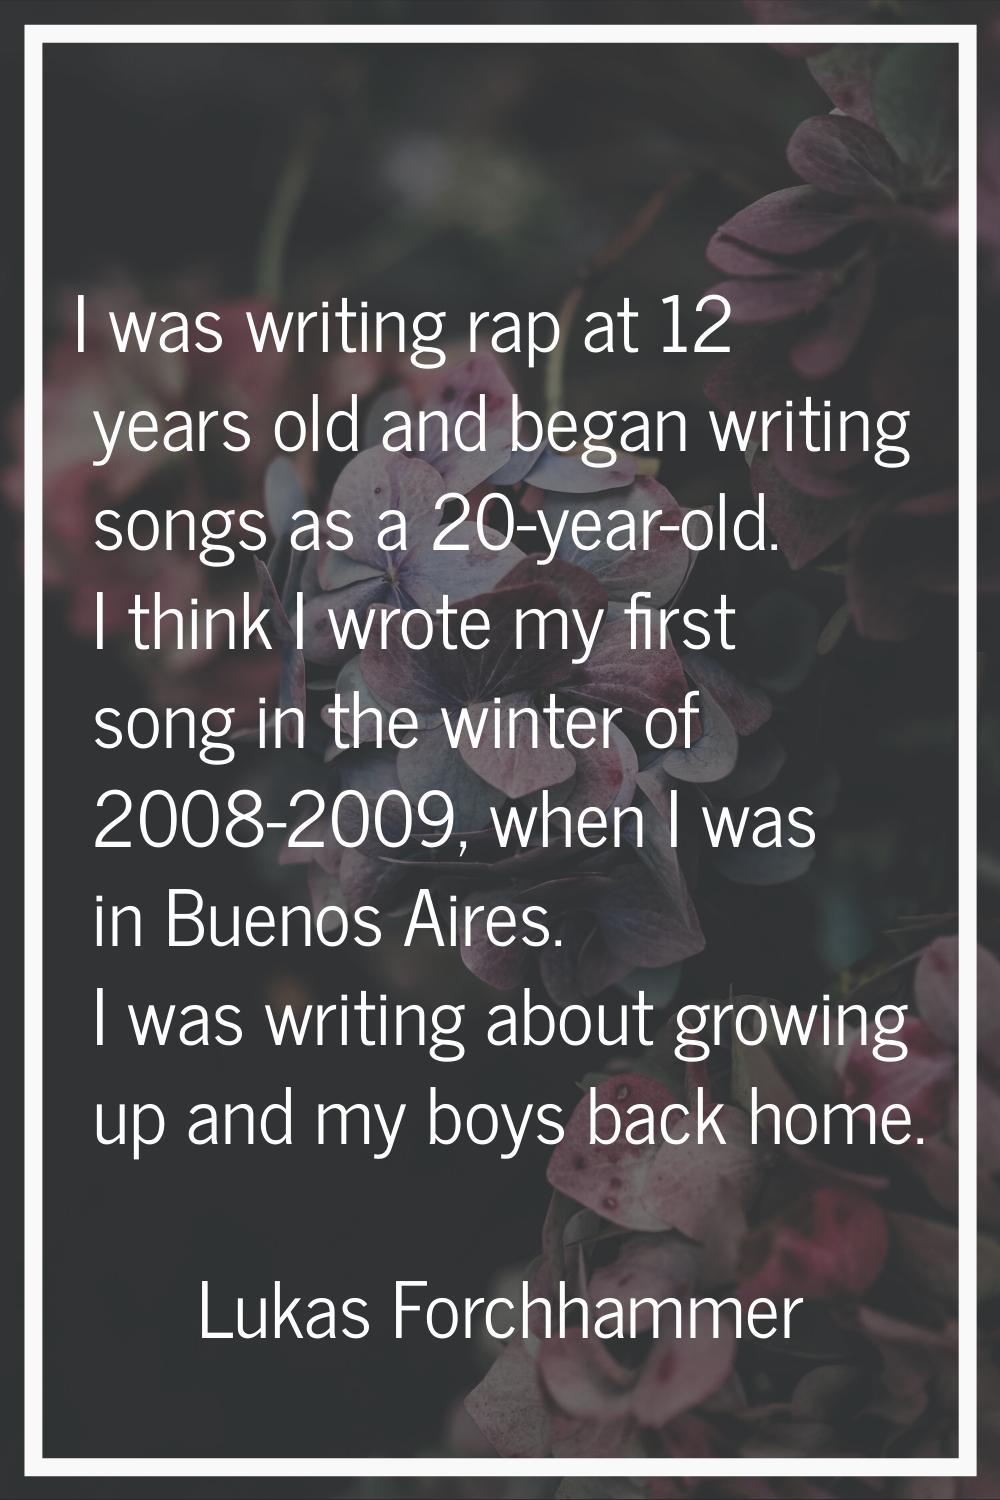 I was writing rap at 12 years old and began writing songs as a 20-year-old. I think I wrote my firs